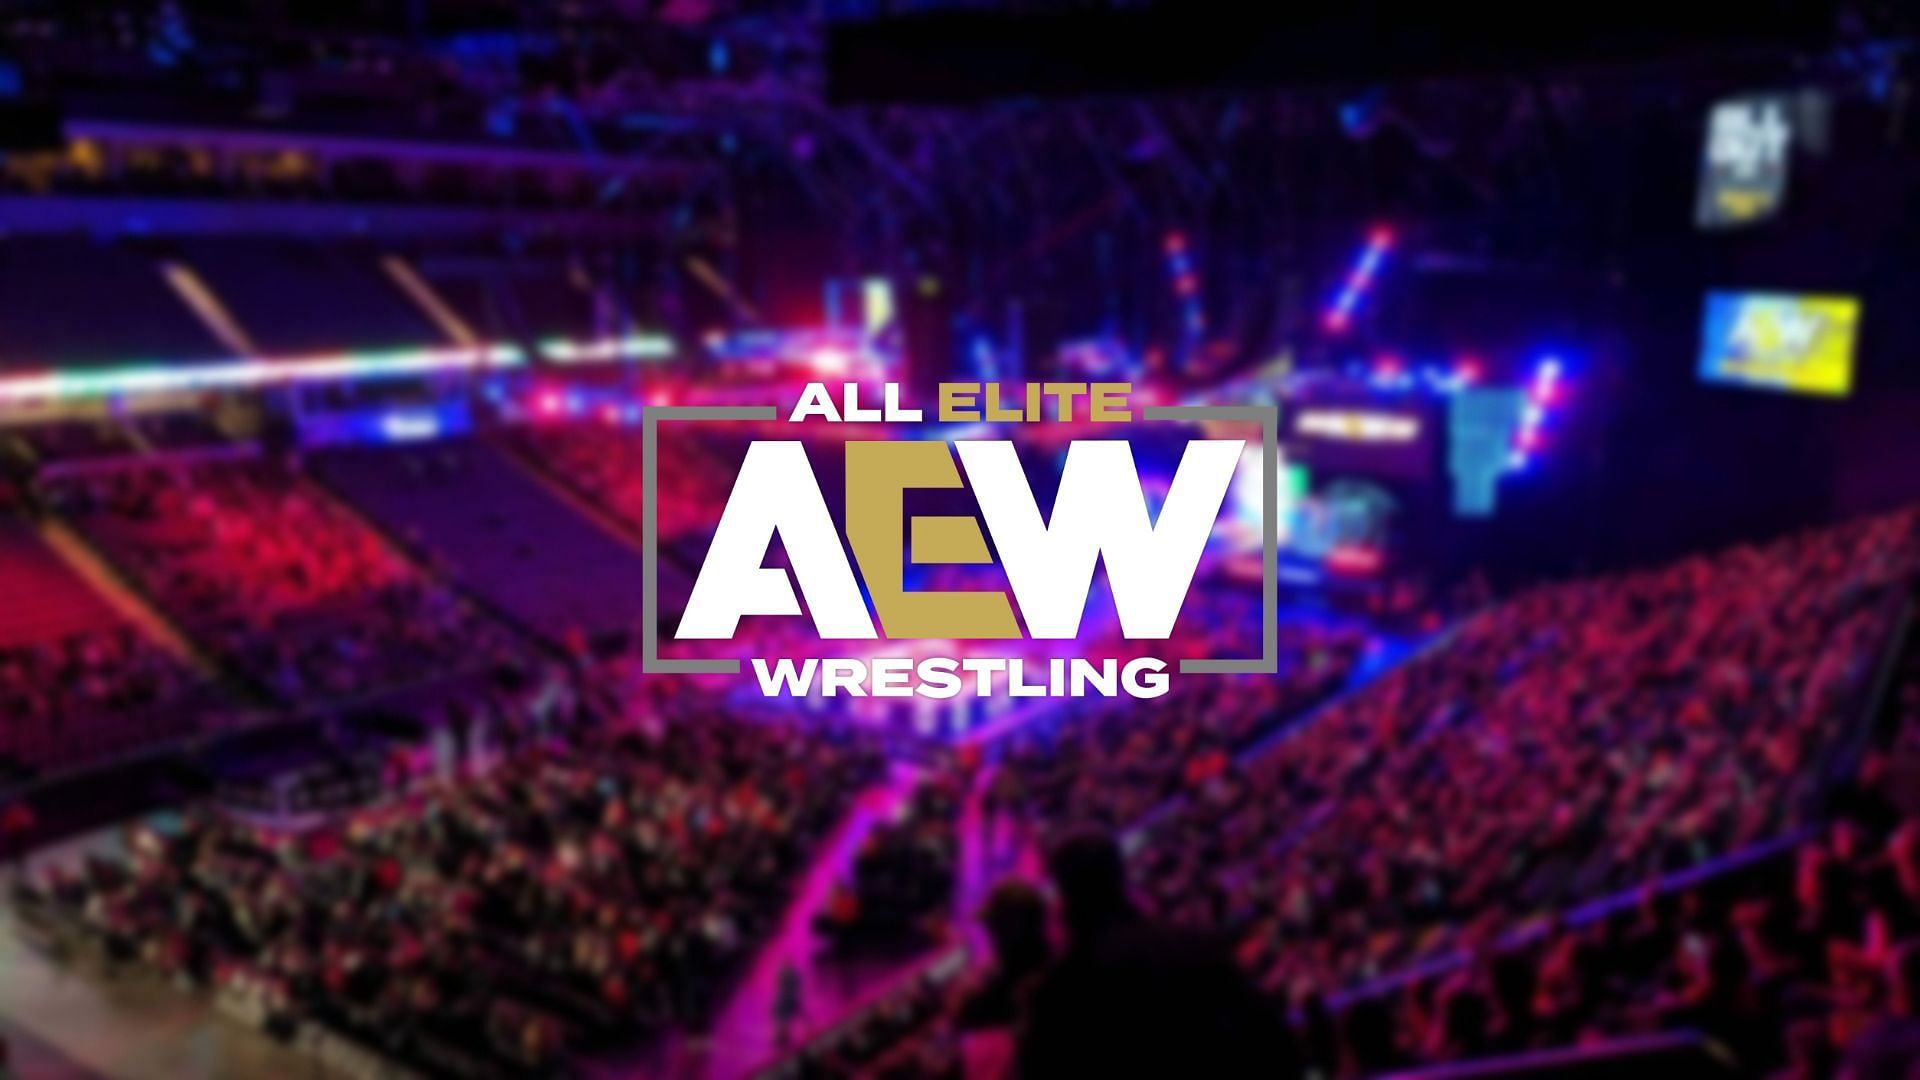 17-year-old up-and-coming star will make his AEW in-ring debut next week